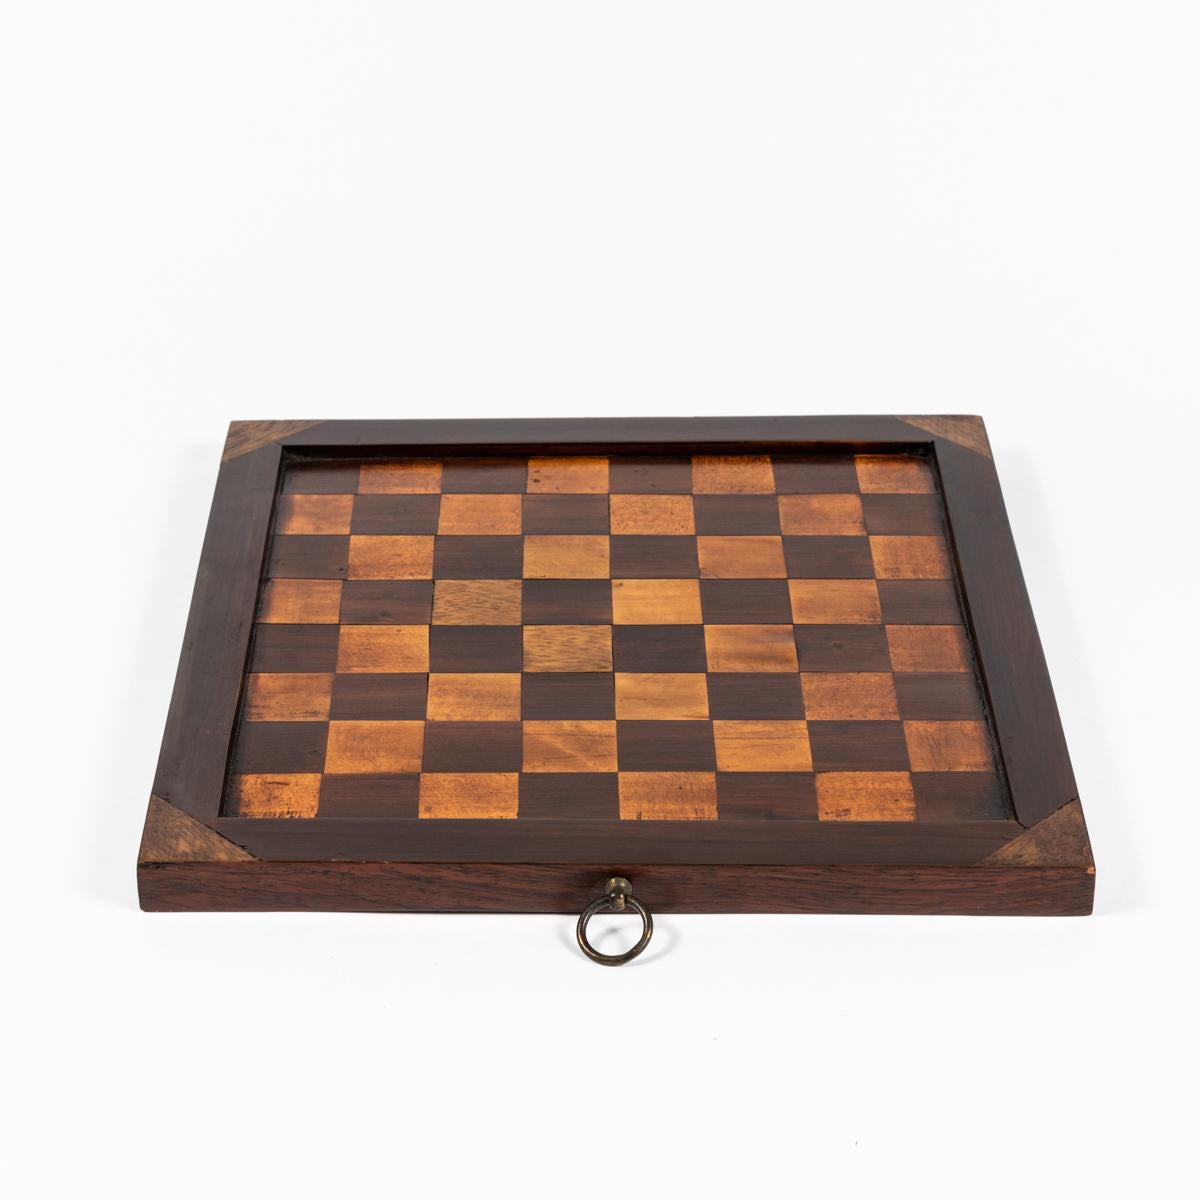 19th Century Antique Inlaid Wood Checkerboard In Good Condition For Sale In Los Angeles, CA